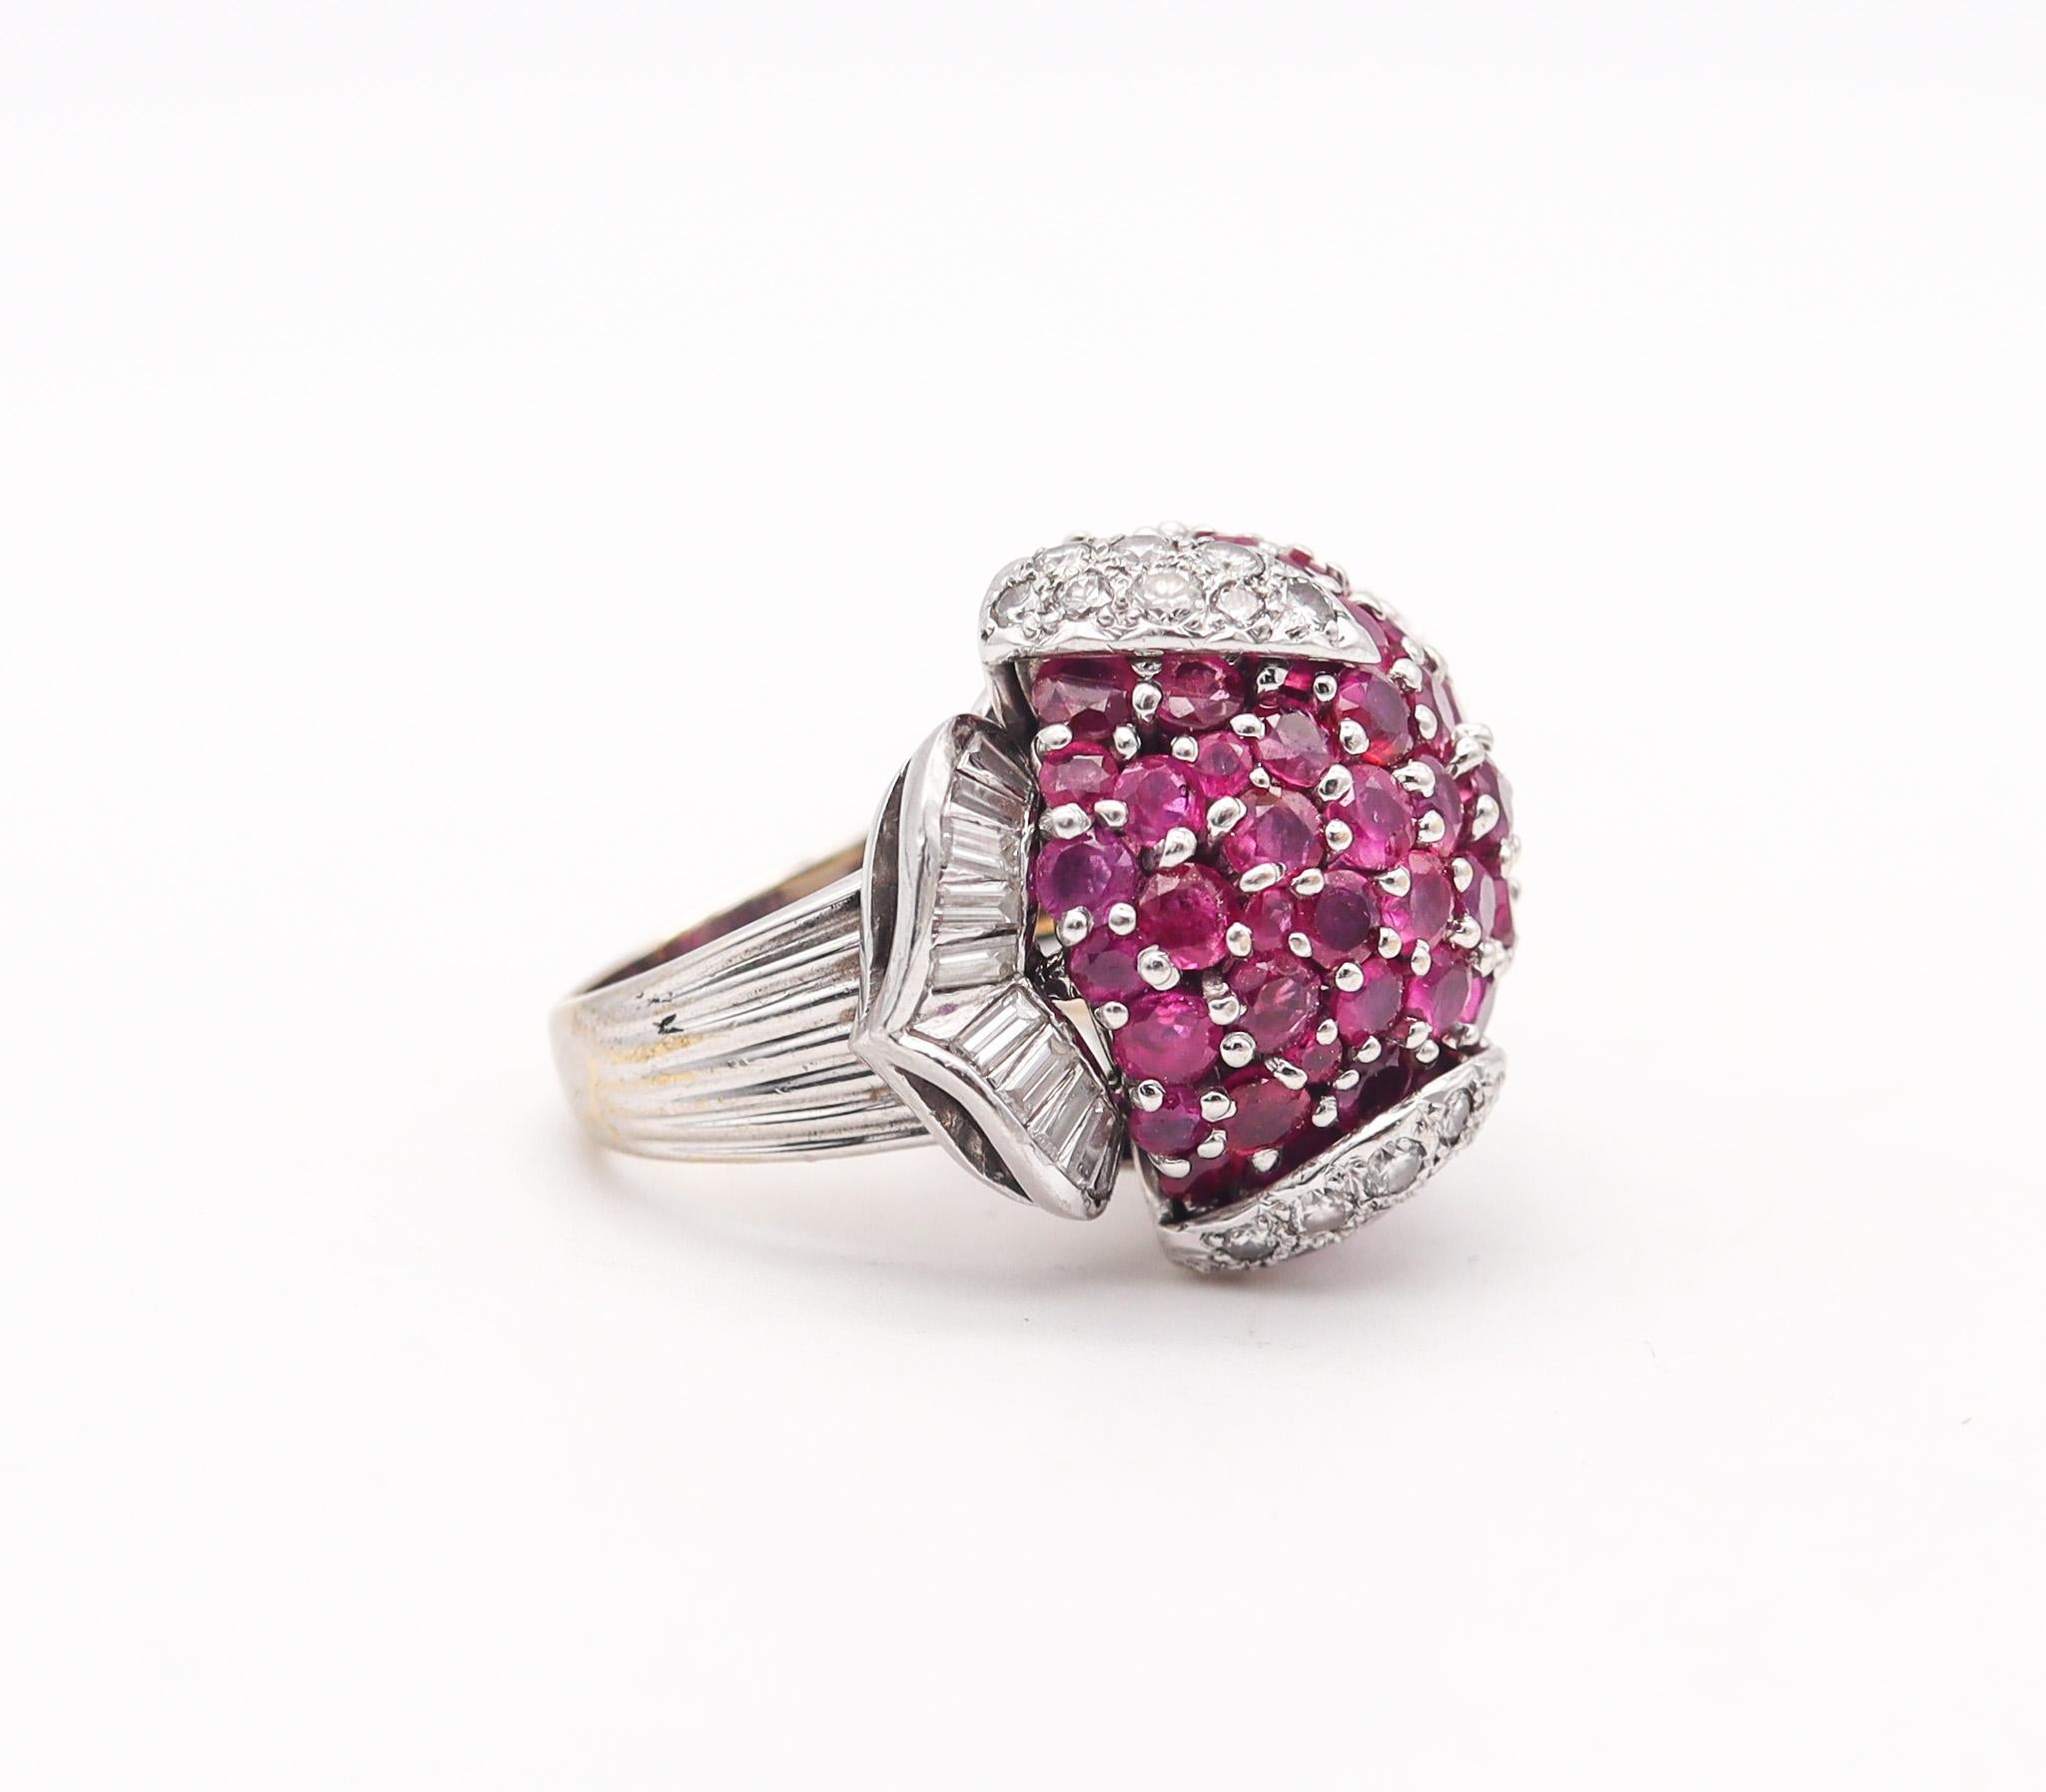 Mixed Cut Modernist 1960 Cocktail Ring In 18Kt Gold With 15.36 Ctw In Diamonds And Rubies For Sale